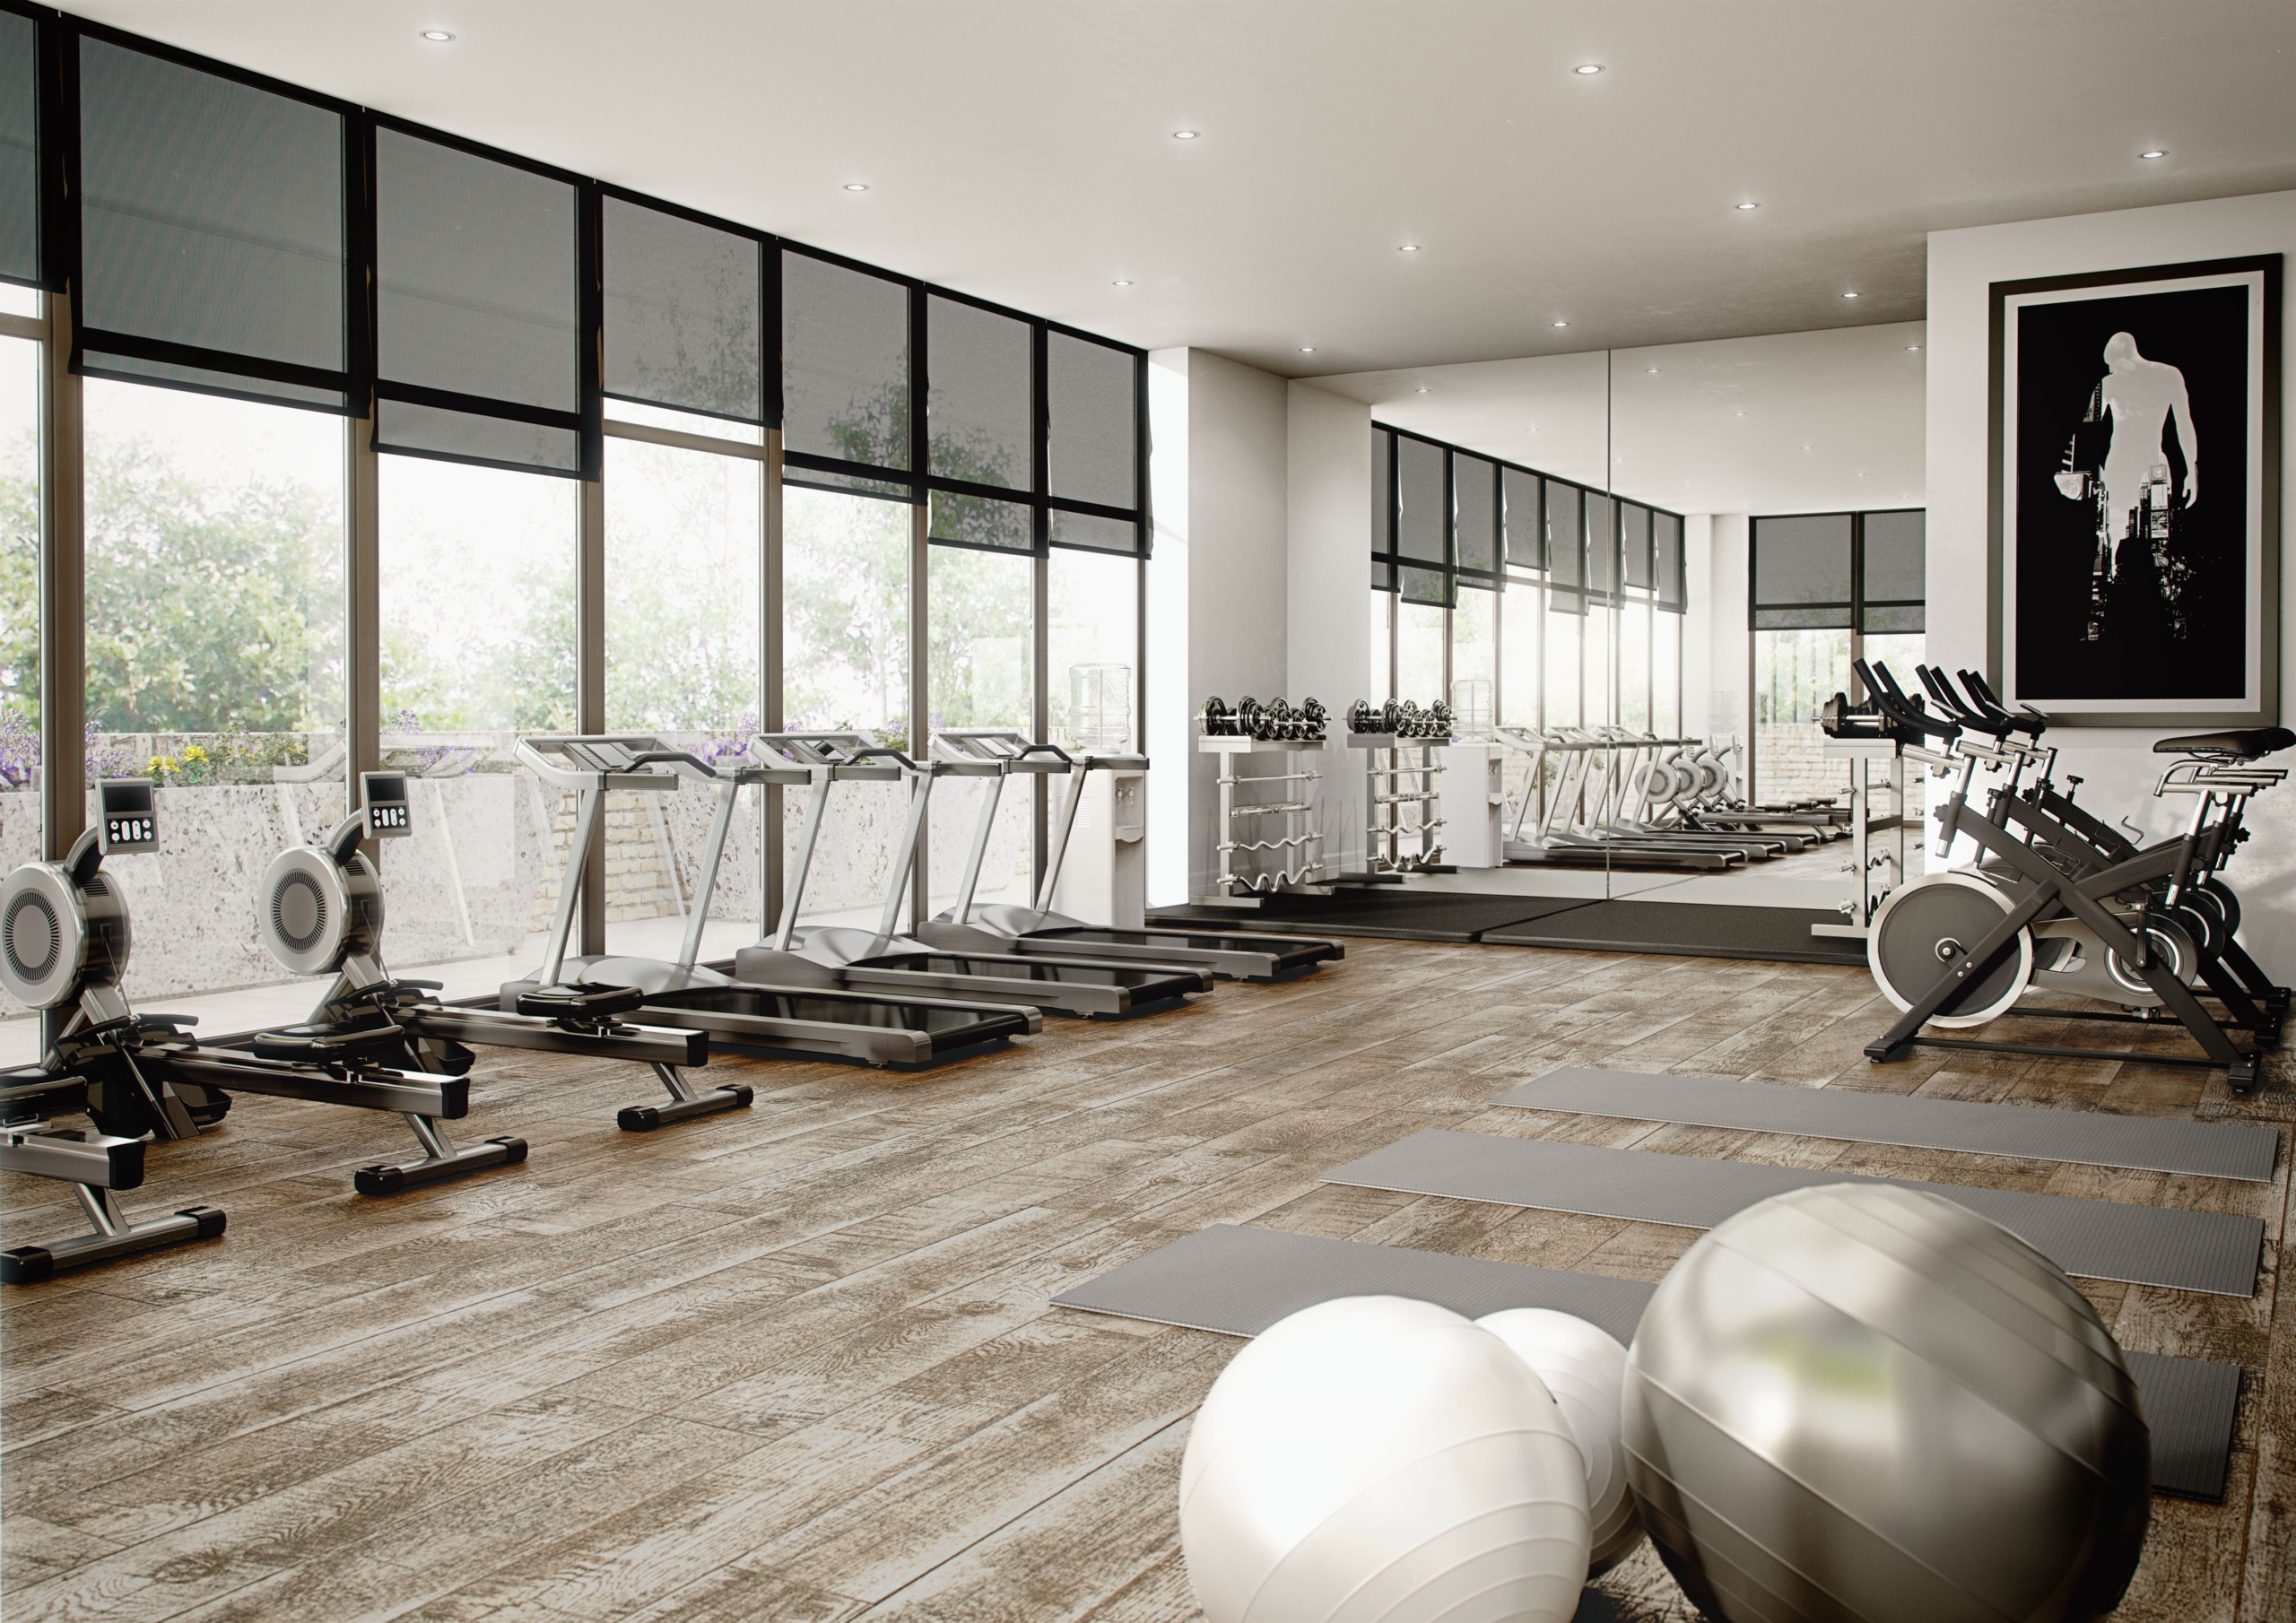 The Gym, one of the Amenities at The Waterhouse Manchester